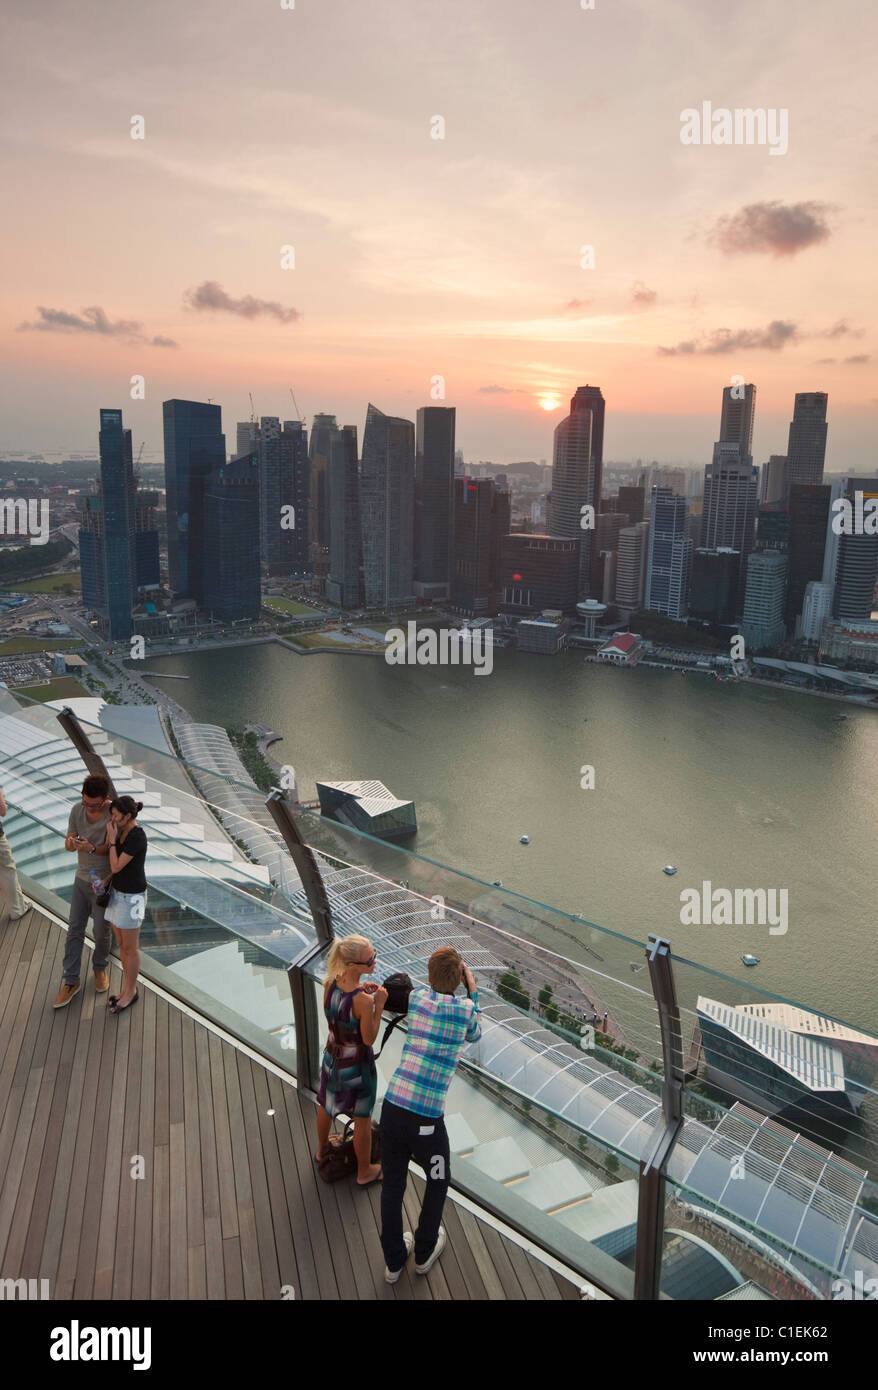 Visitors look out over Singapore skyline from observation deck of the Marina Bay Sands SkyPark.  Marina Bay, Singapore Stock Photo